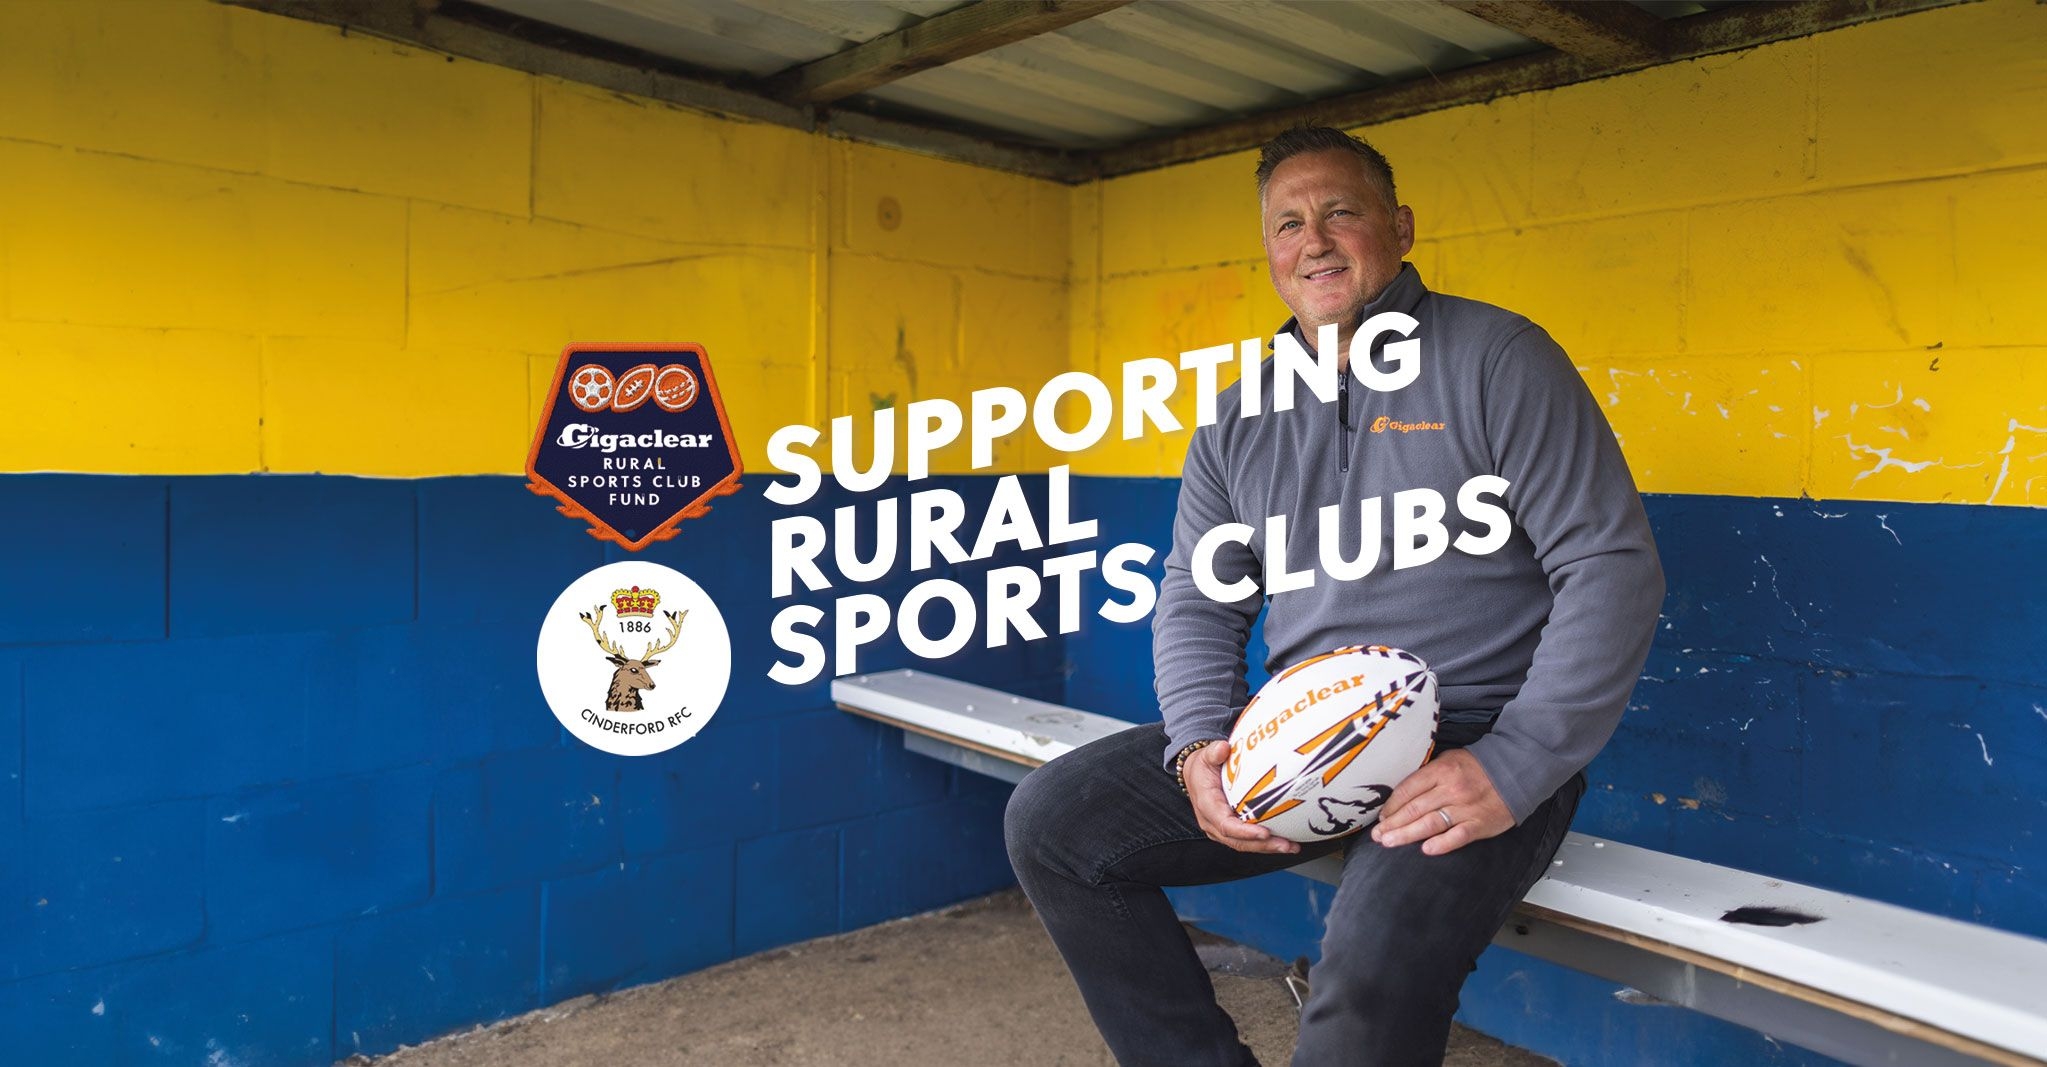 Darren Gough speaking to Gigaclear about his role as the Rural Sports Club Fund ambassador